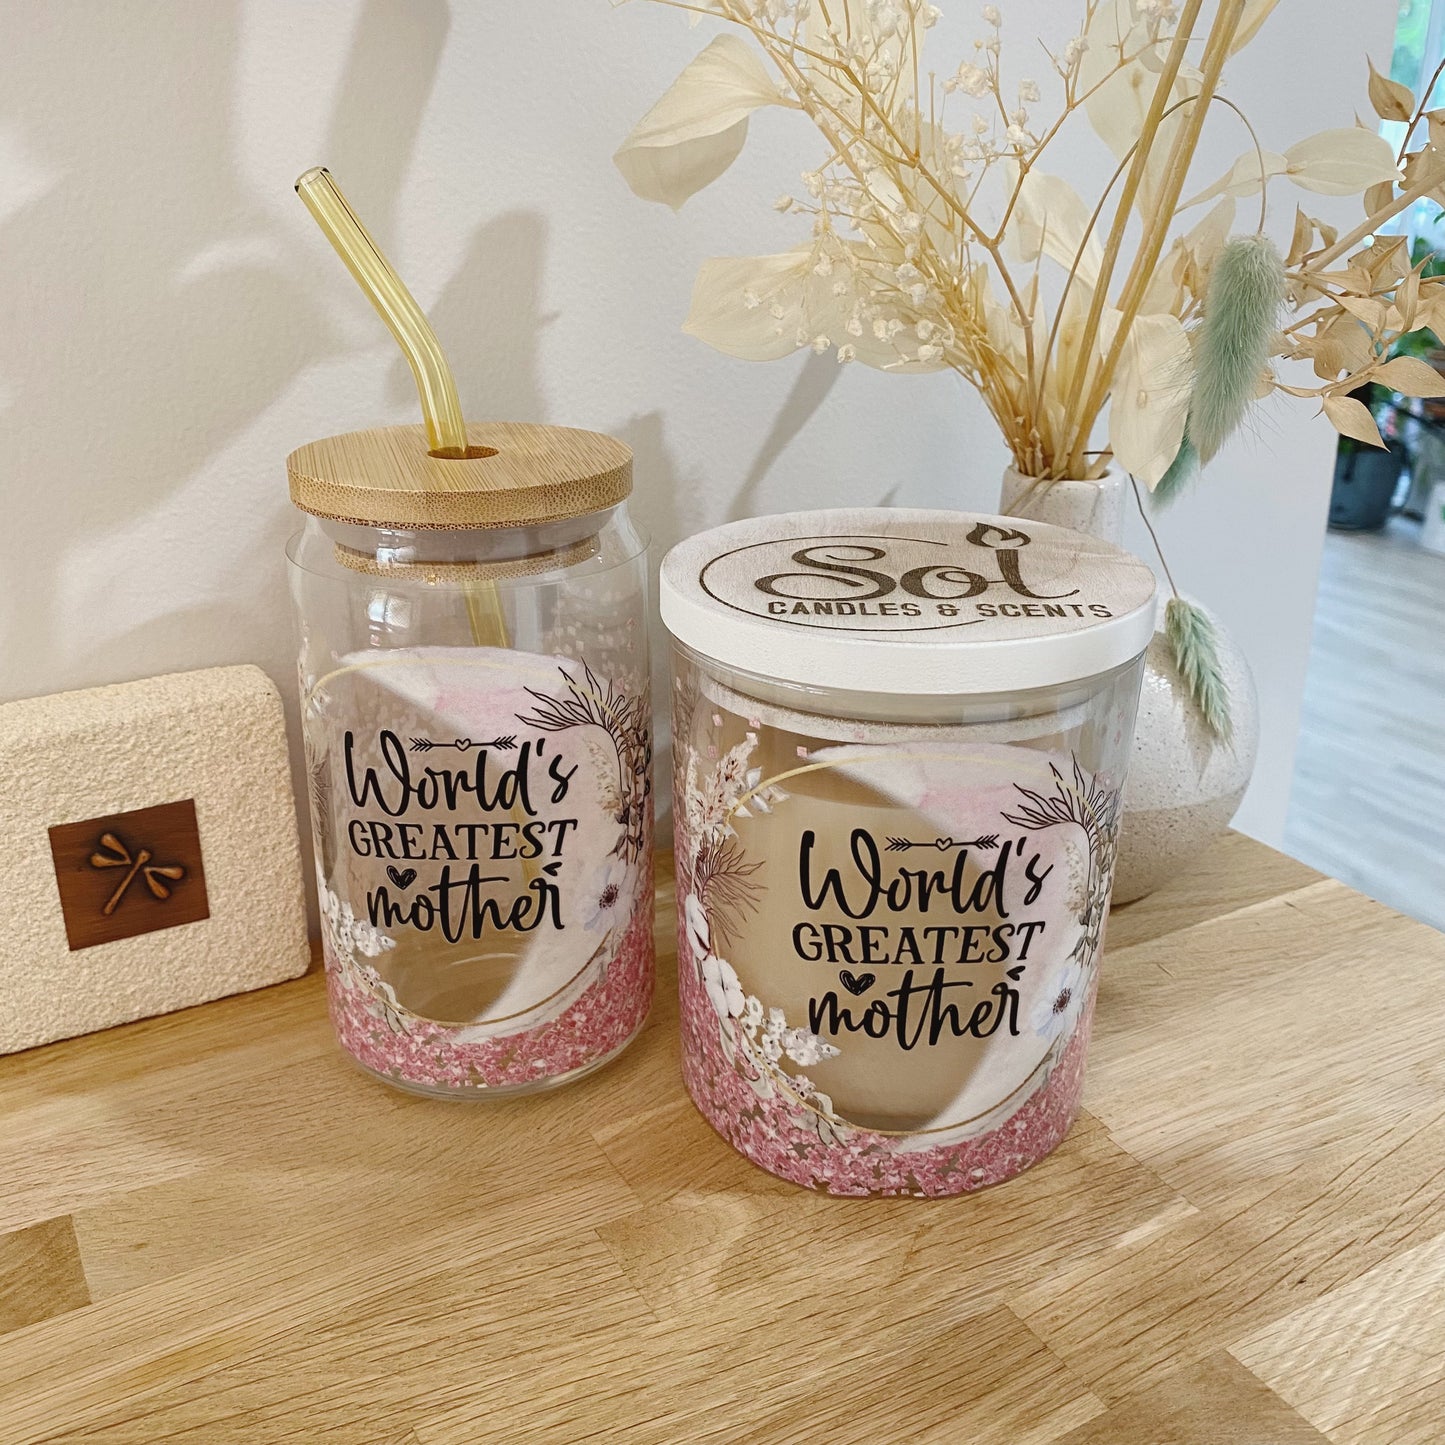 World's Greatest Mother Glassware & Candle Set